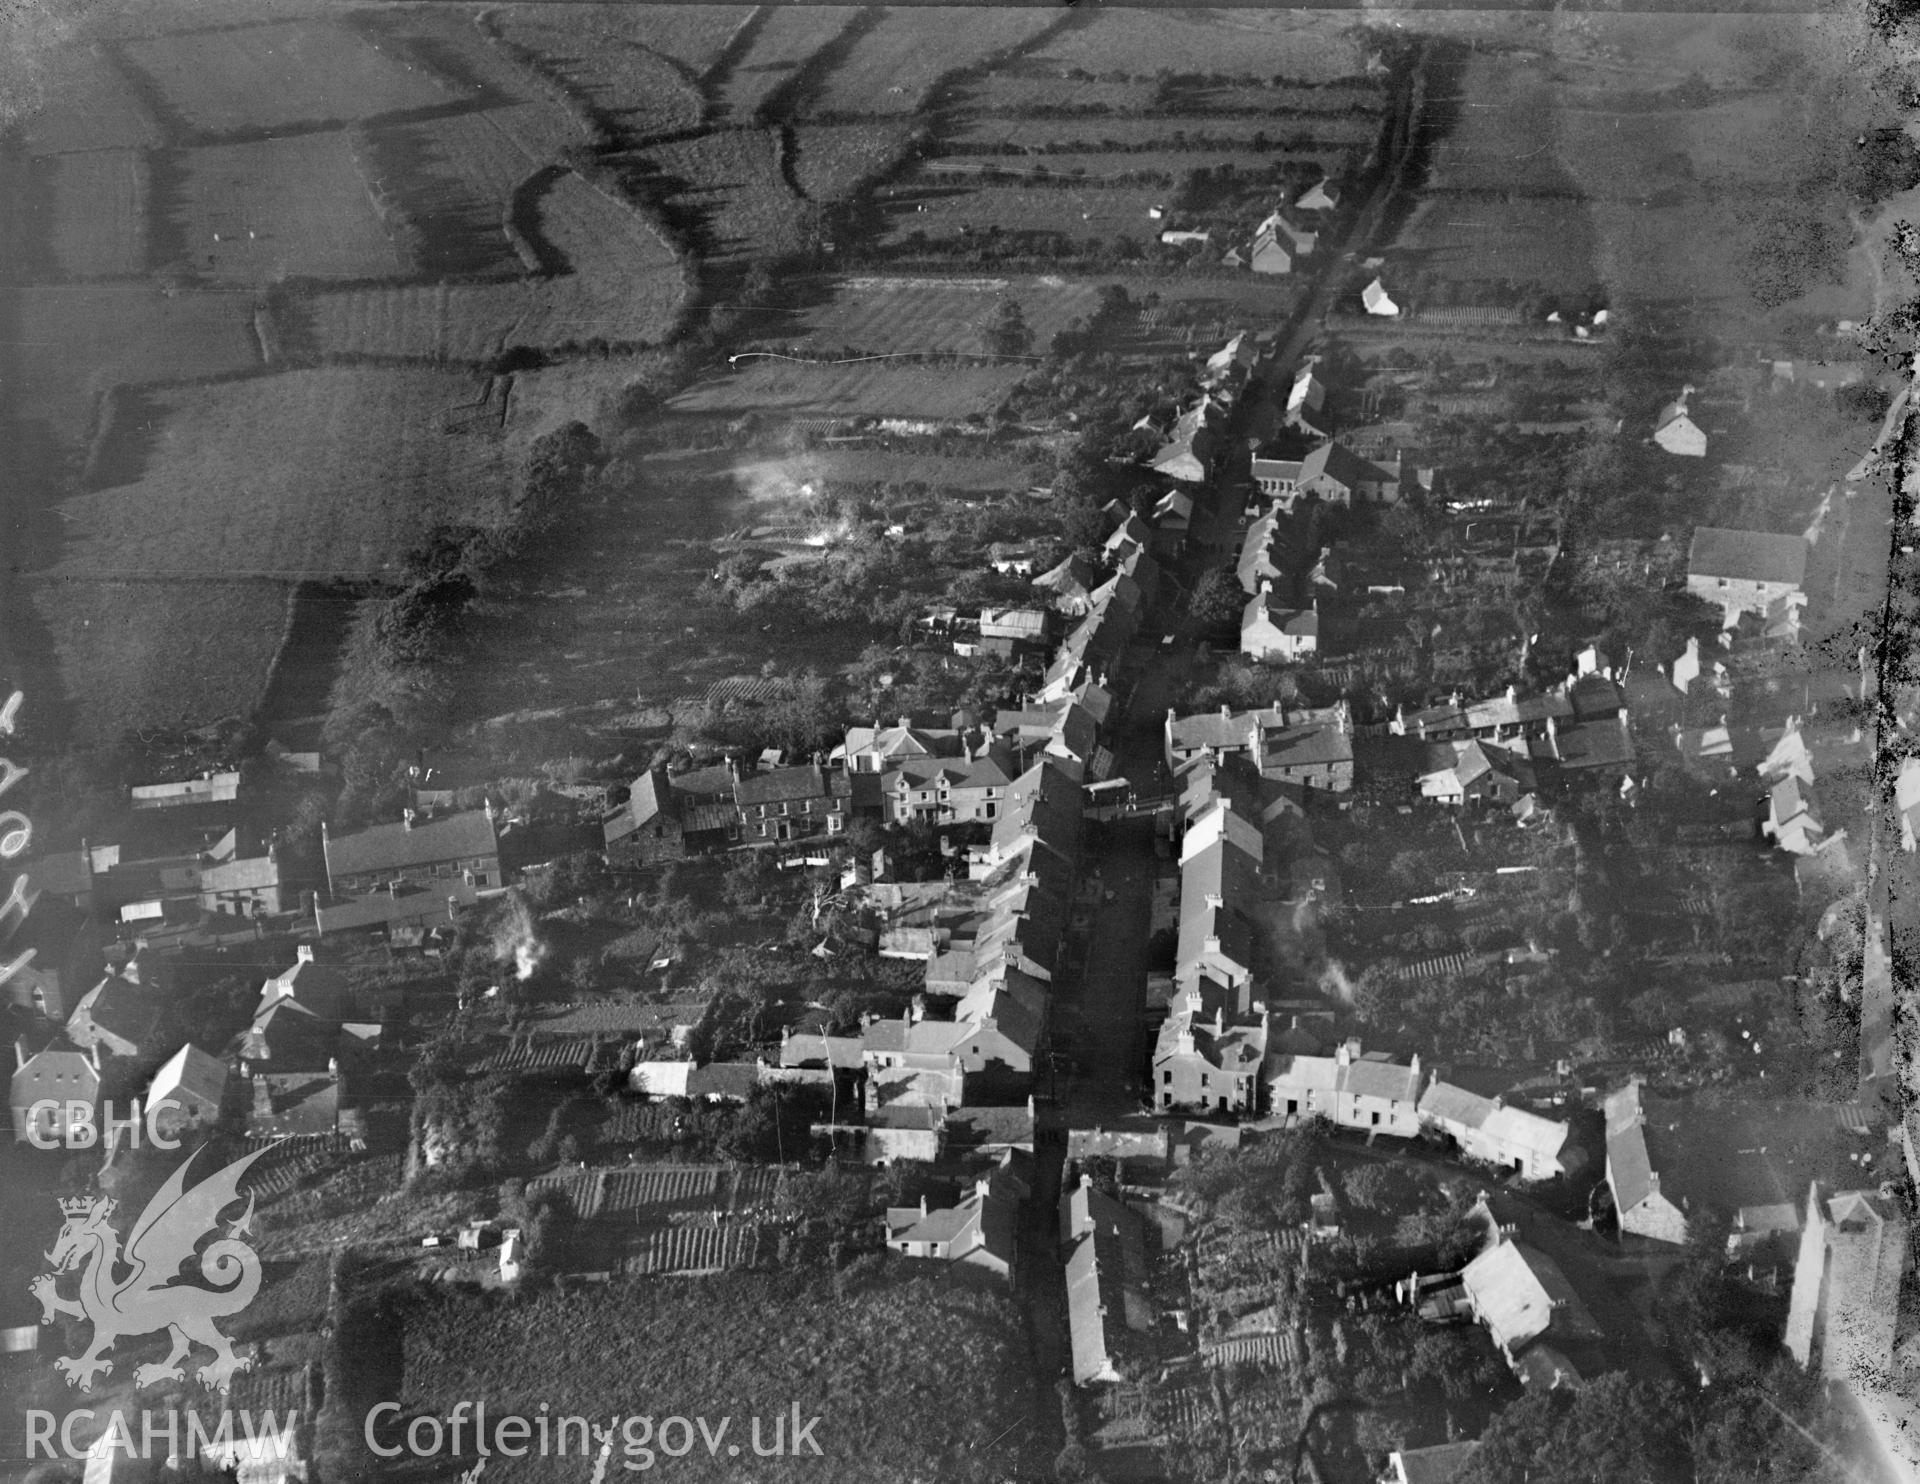 View of Newport, Pembrokeshire, oblique aerial view. 5?x4? black and white glass plate negative.